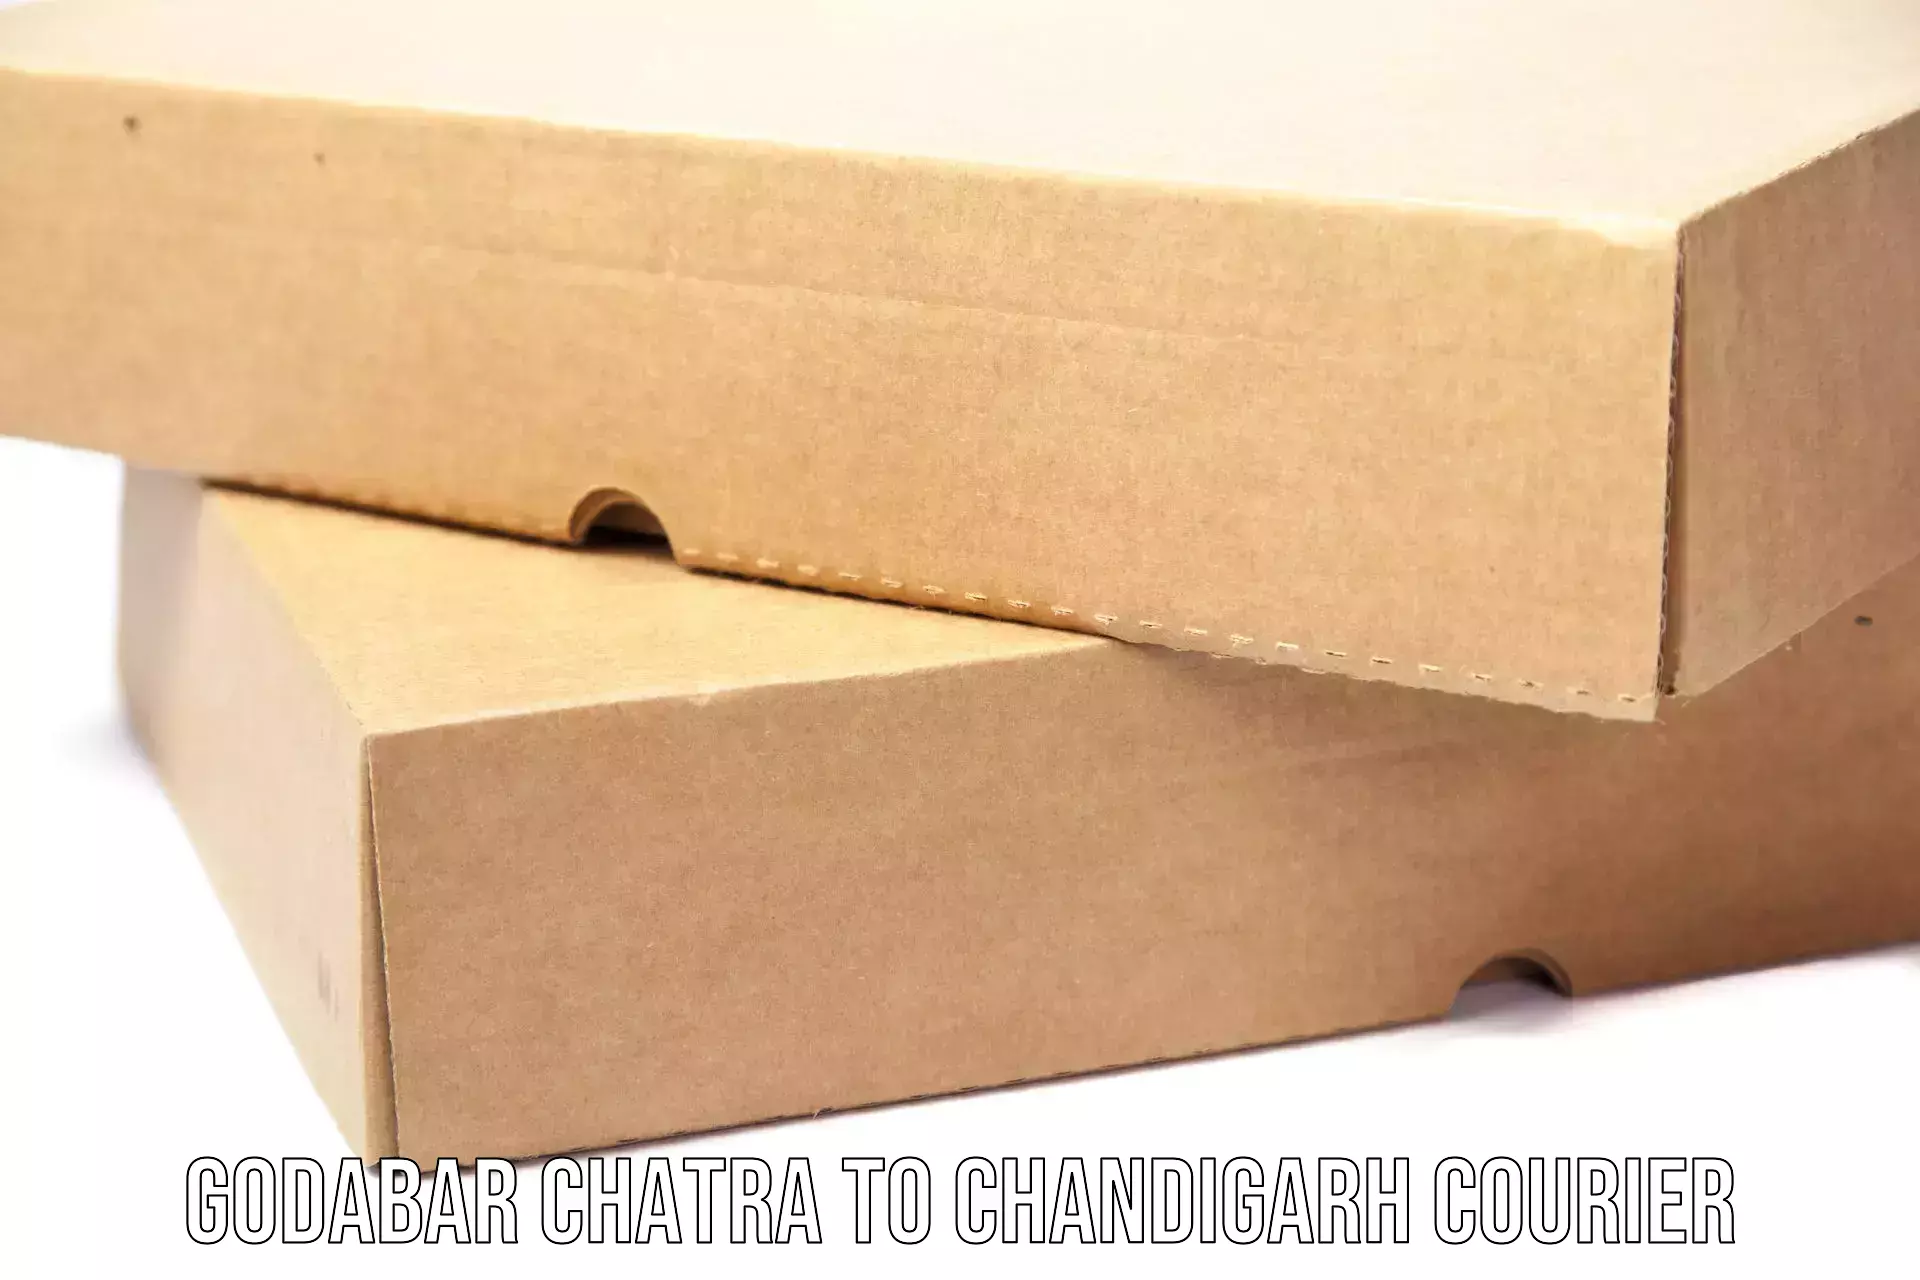 Personal courier services Godabar Chatra to Chandigarh